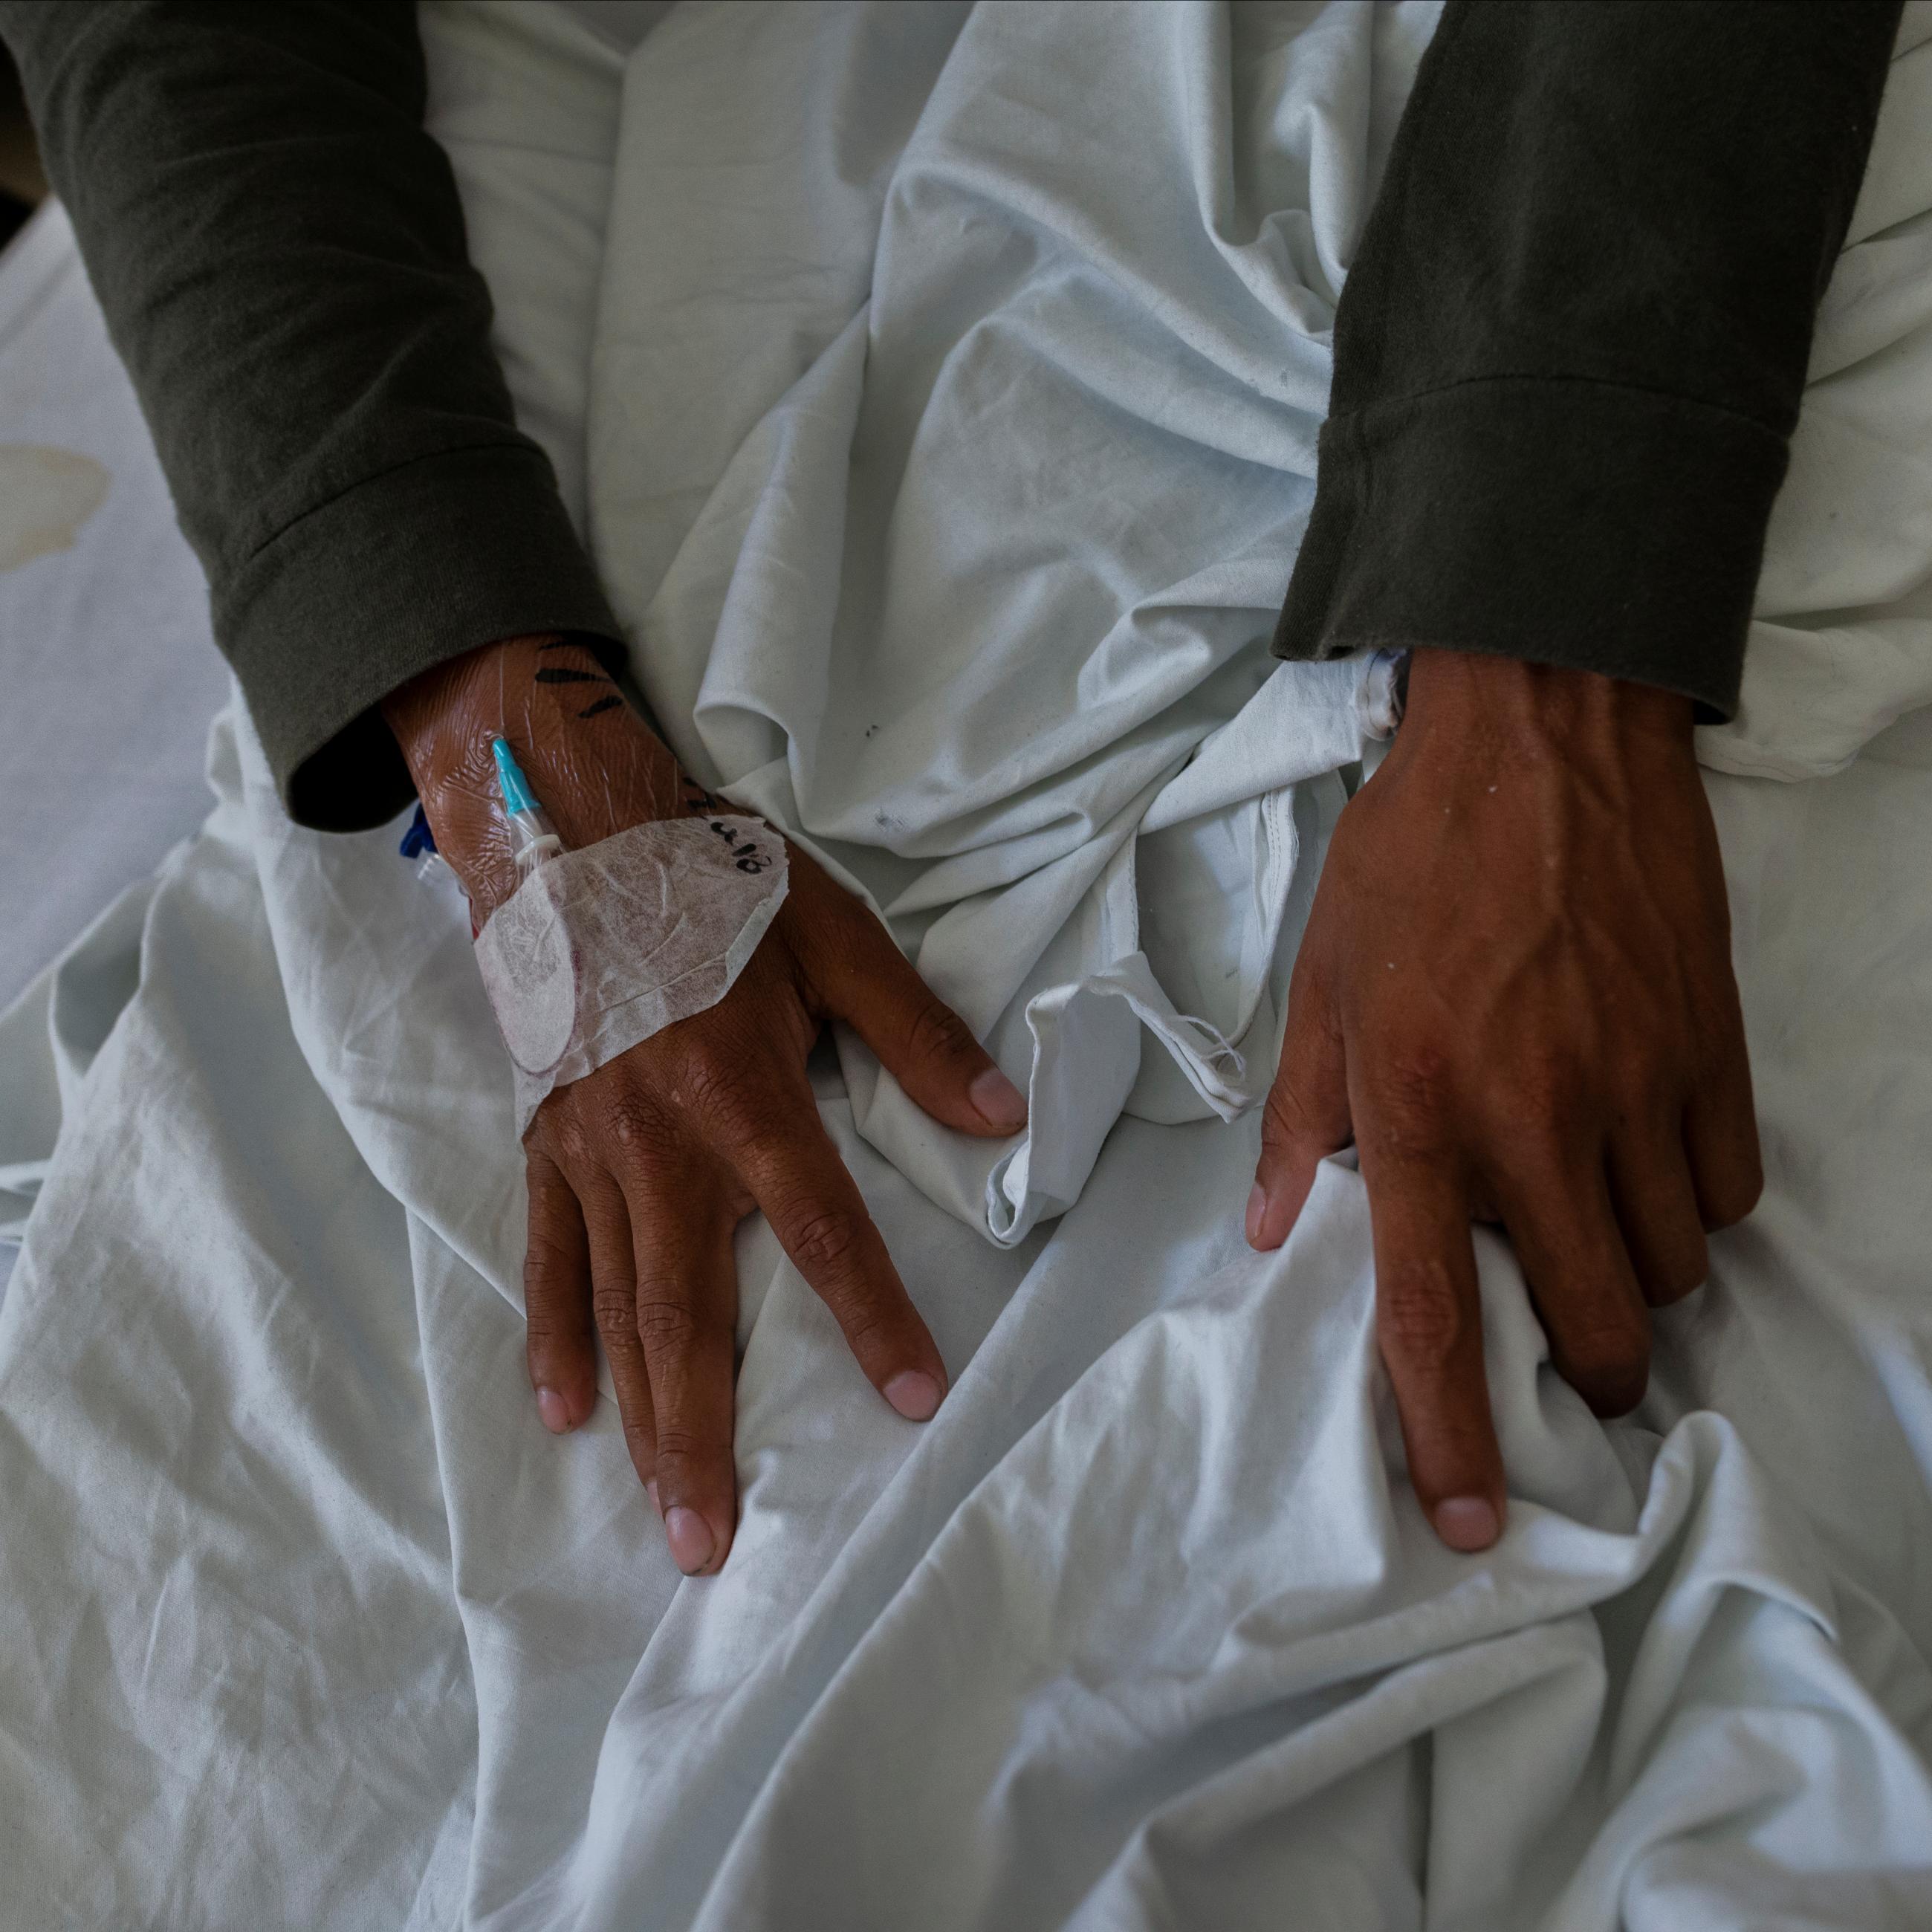 The hands of TB patient Arturo Maldonado, 25, can be seen during his treatment for tuberculosis at the Hospital Muñiz, in Buenos Aires, Argentina, on January 11, 2019. 